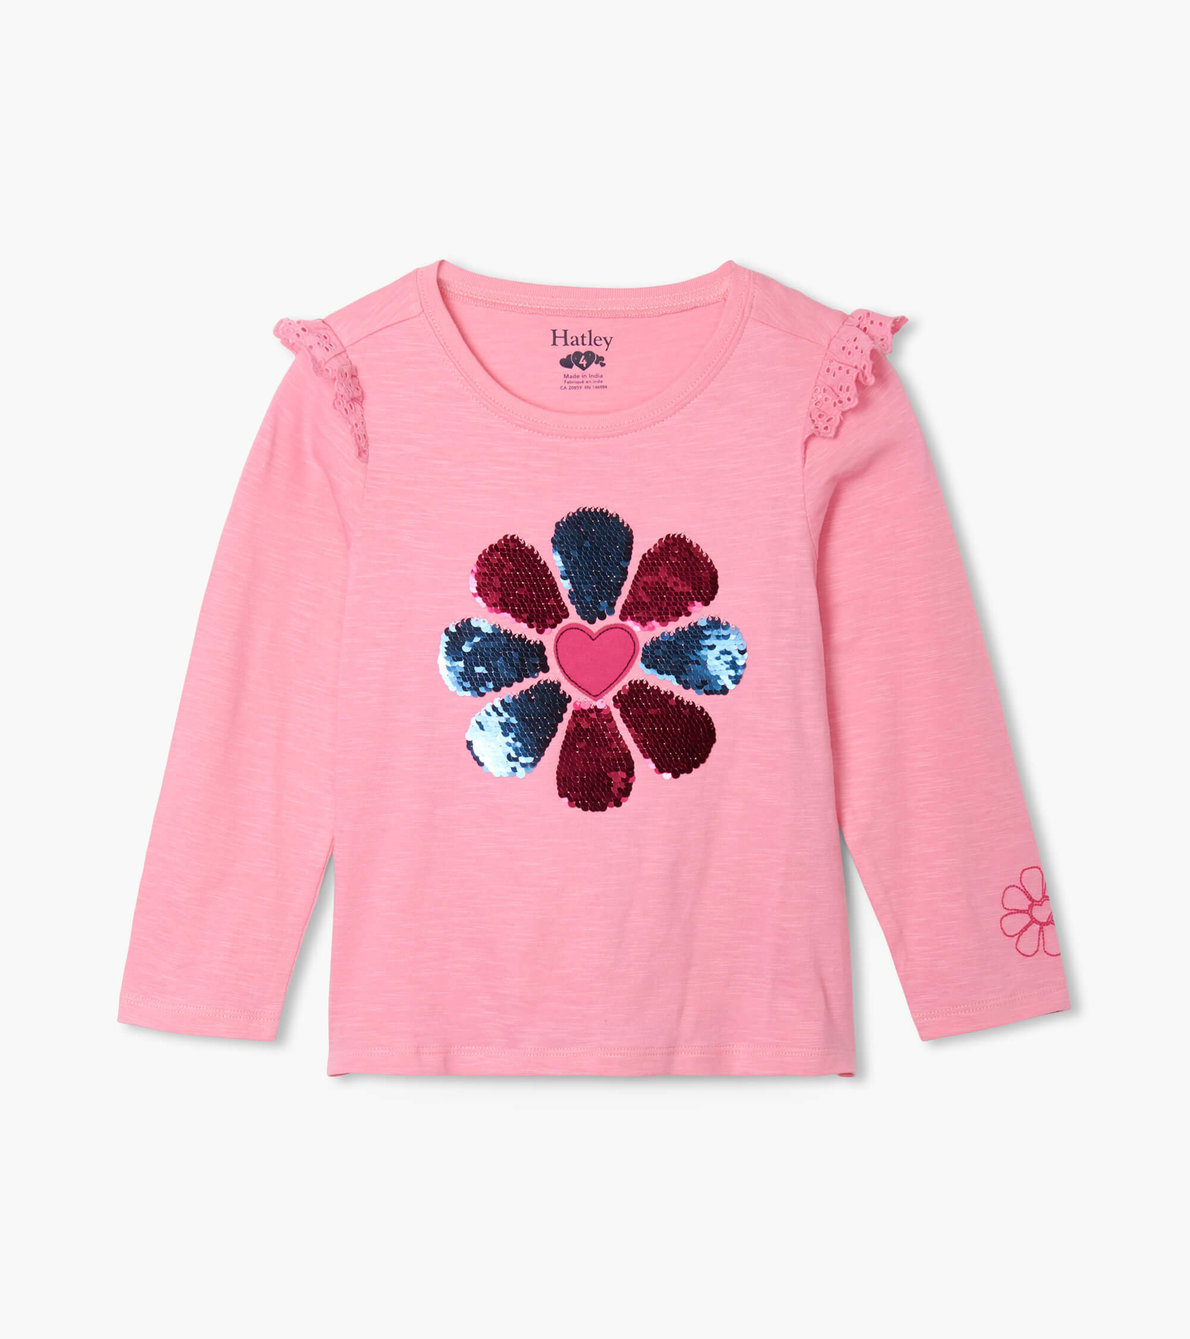 View larger image of Patchwork Flower Eyelet Trim Long Sleeve Tee